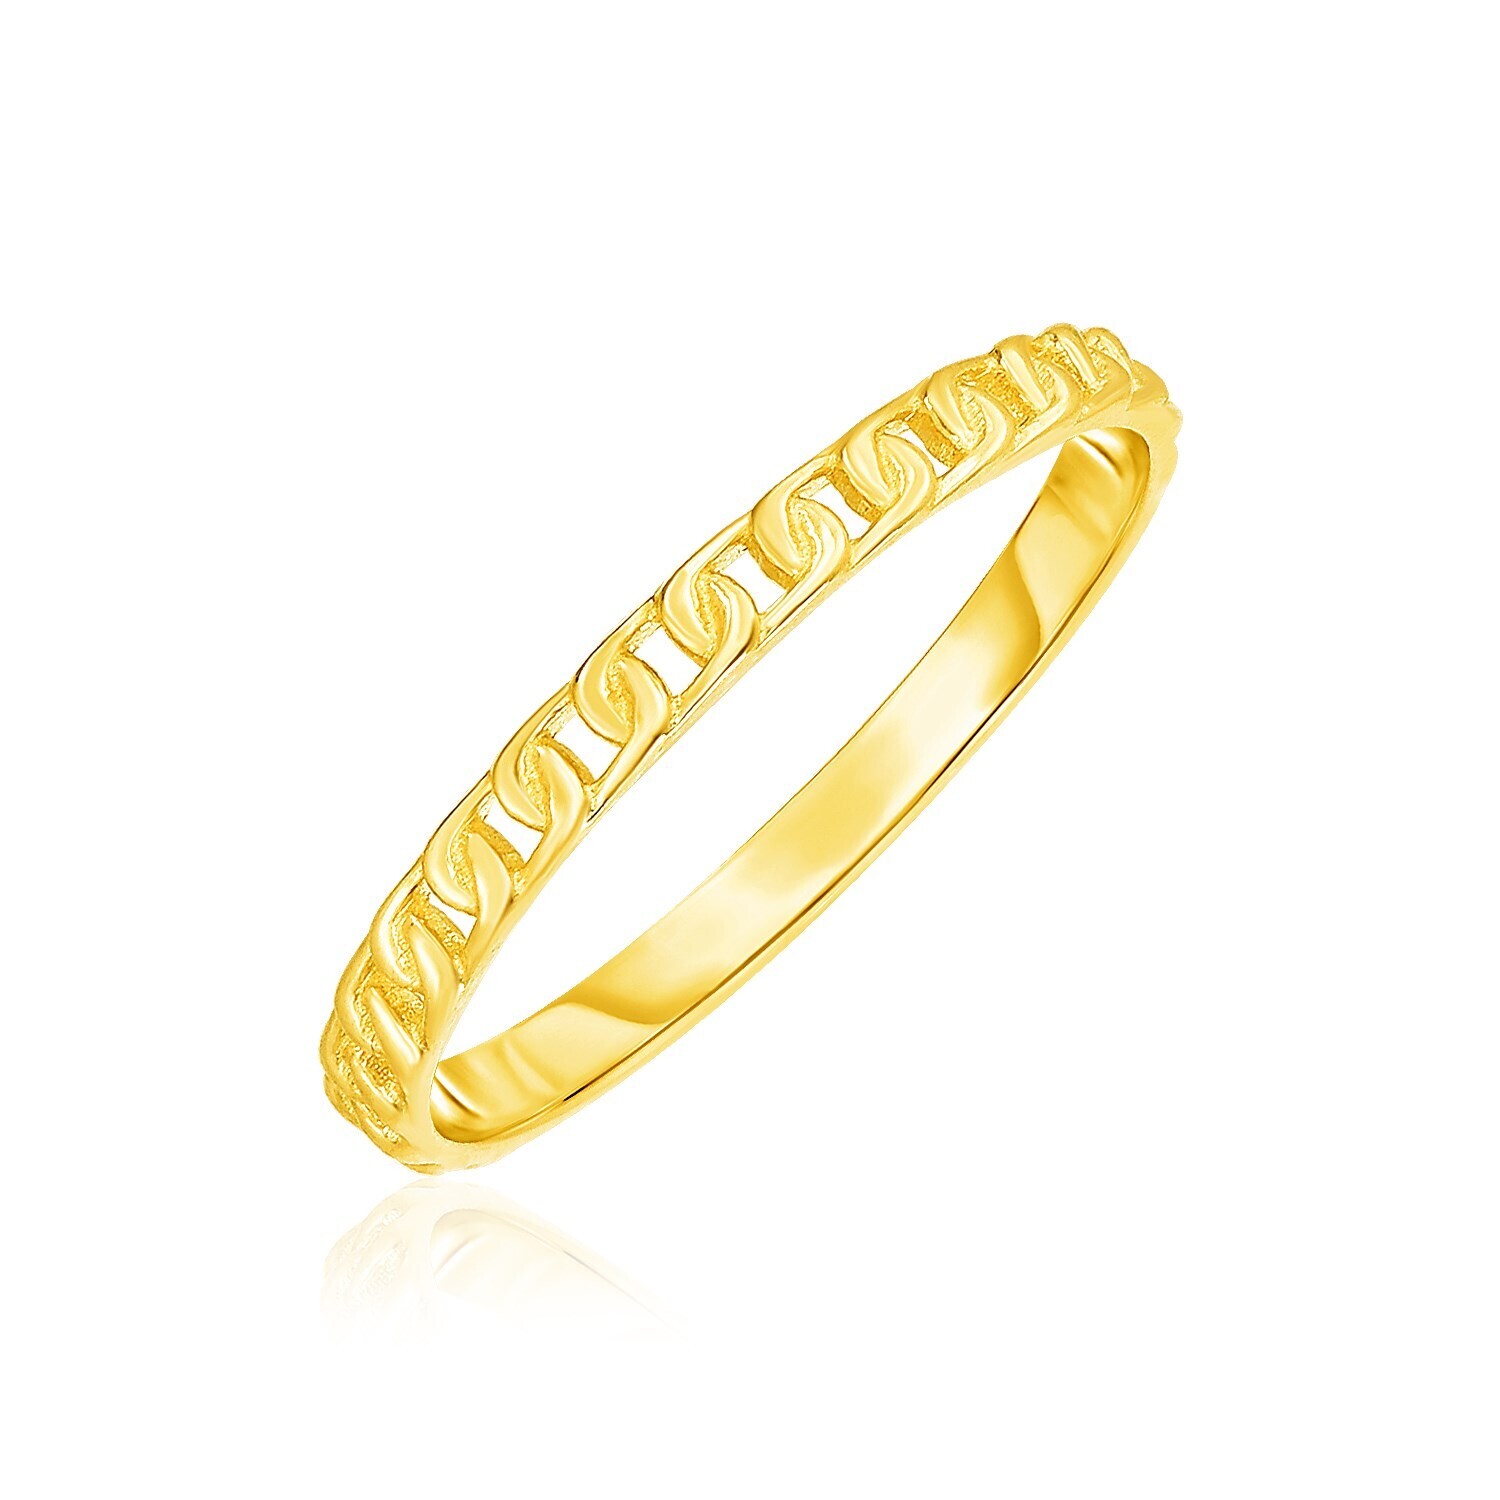 14k Yellow Gold Ring with Bead Texture, Size: 7